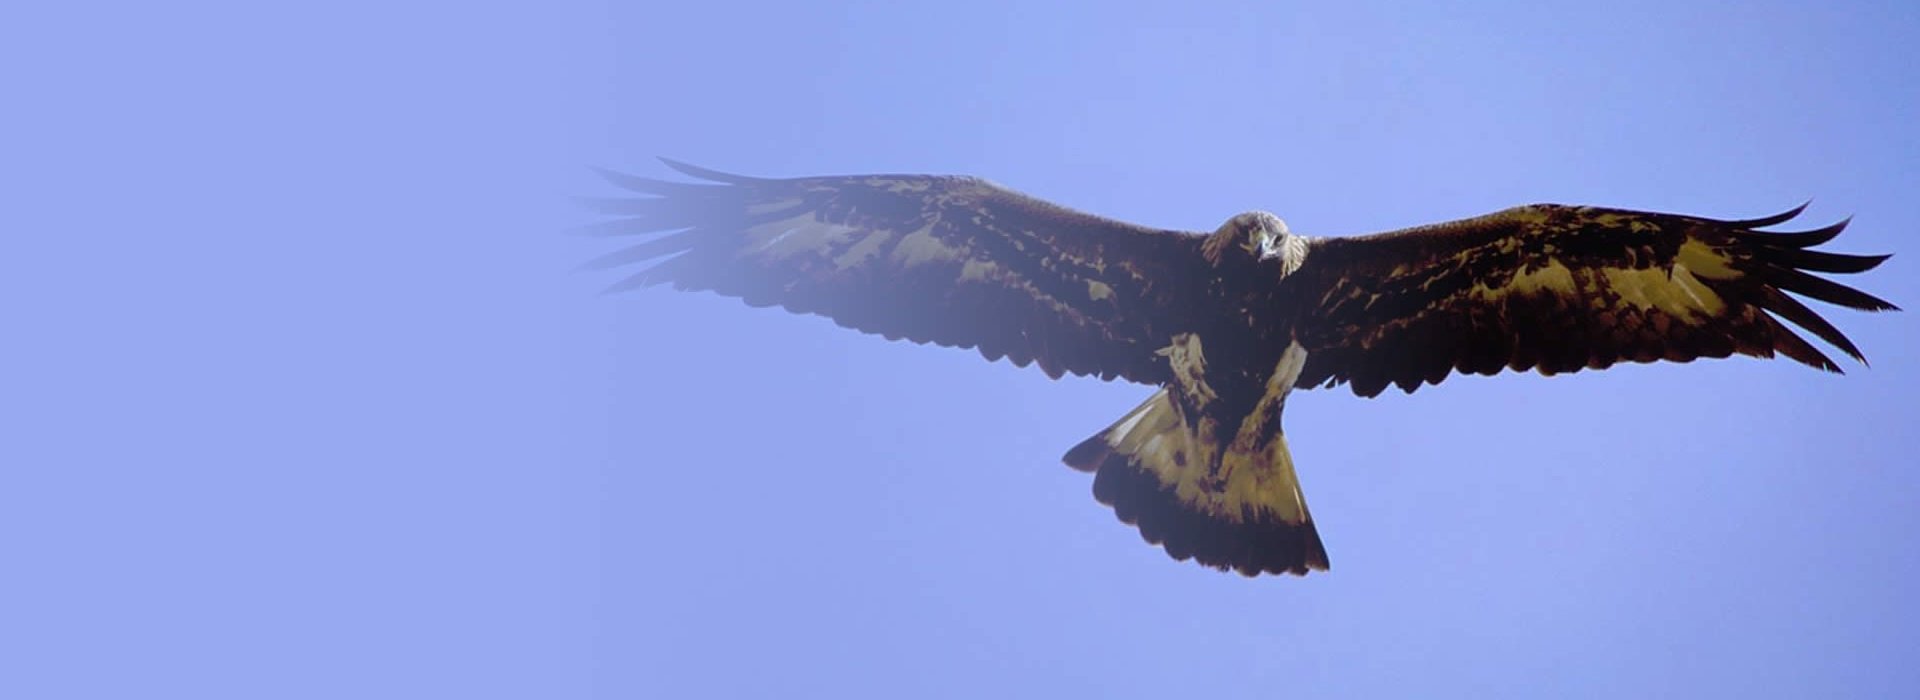 Eagle soaring and looking down